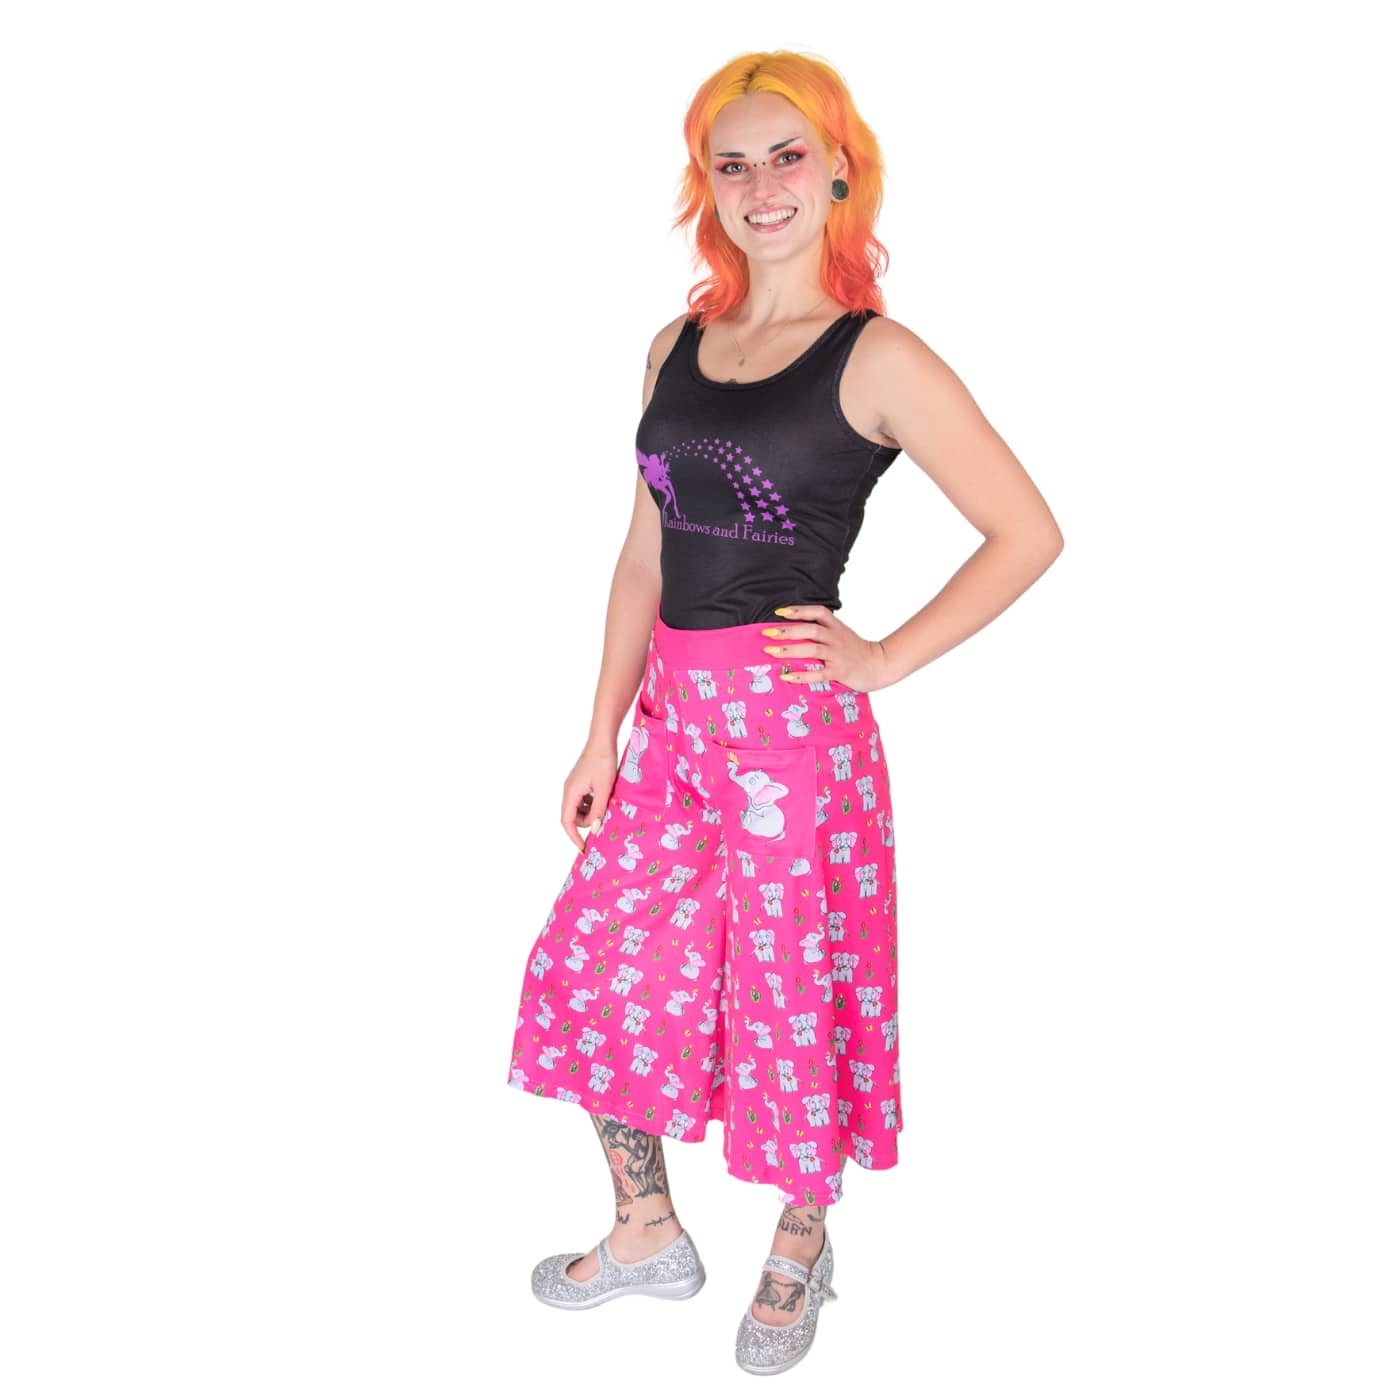 Parade Culottes by RainbowsAndFairies.com.au (Elephant - Tulips - 34 Pants - Kitsch - Vintage Inspired - Animal Print - Cute - Hot Pink - Wide Leg Pants) - SKU: CL_CULTS_PARAD_ORG - Pic-04